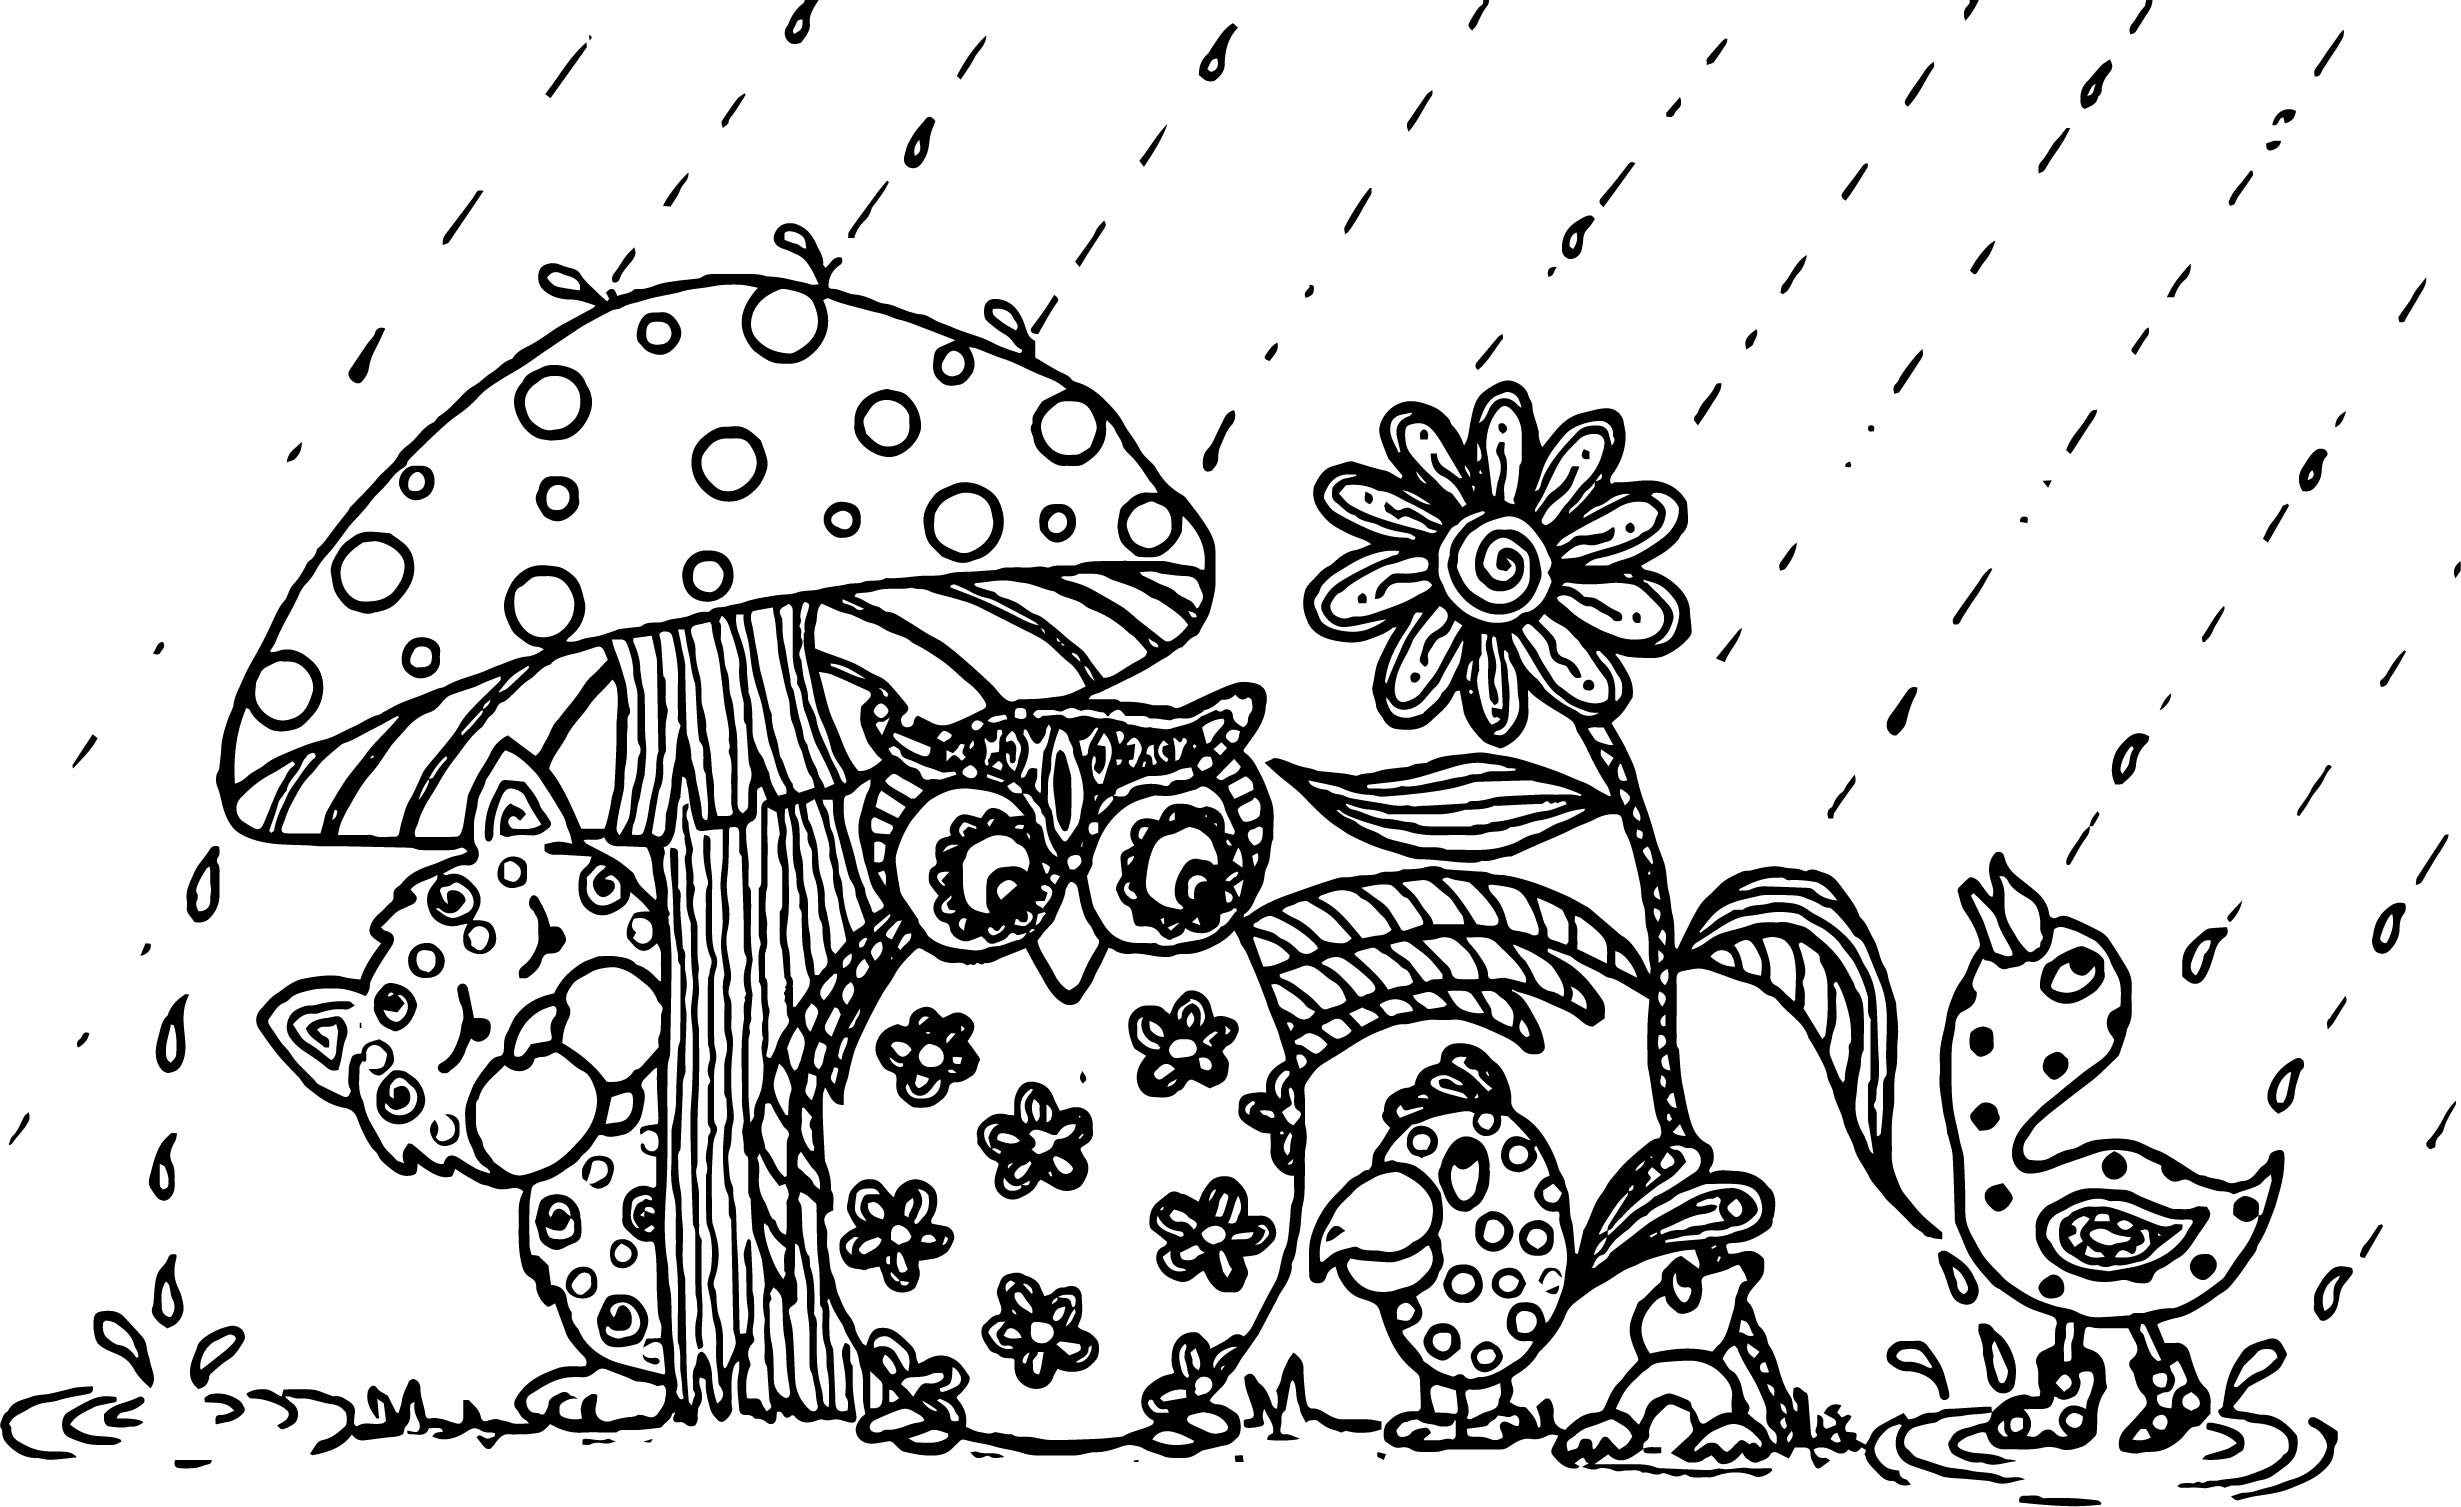 May Flowers Coloring Pages
 April Showers Bring May Flowers Animal April Coloring Page